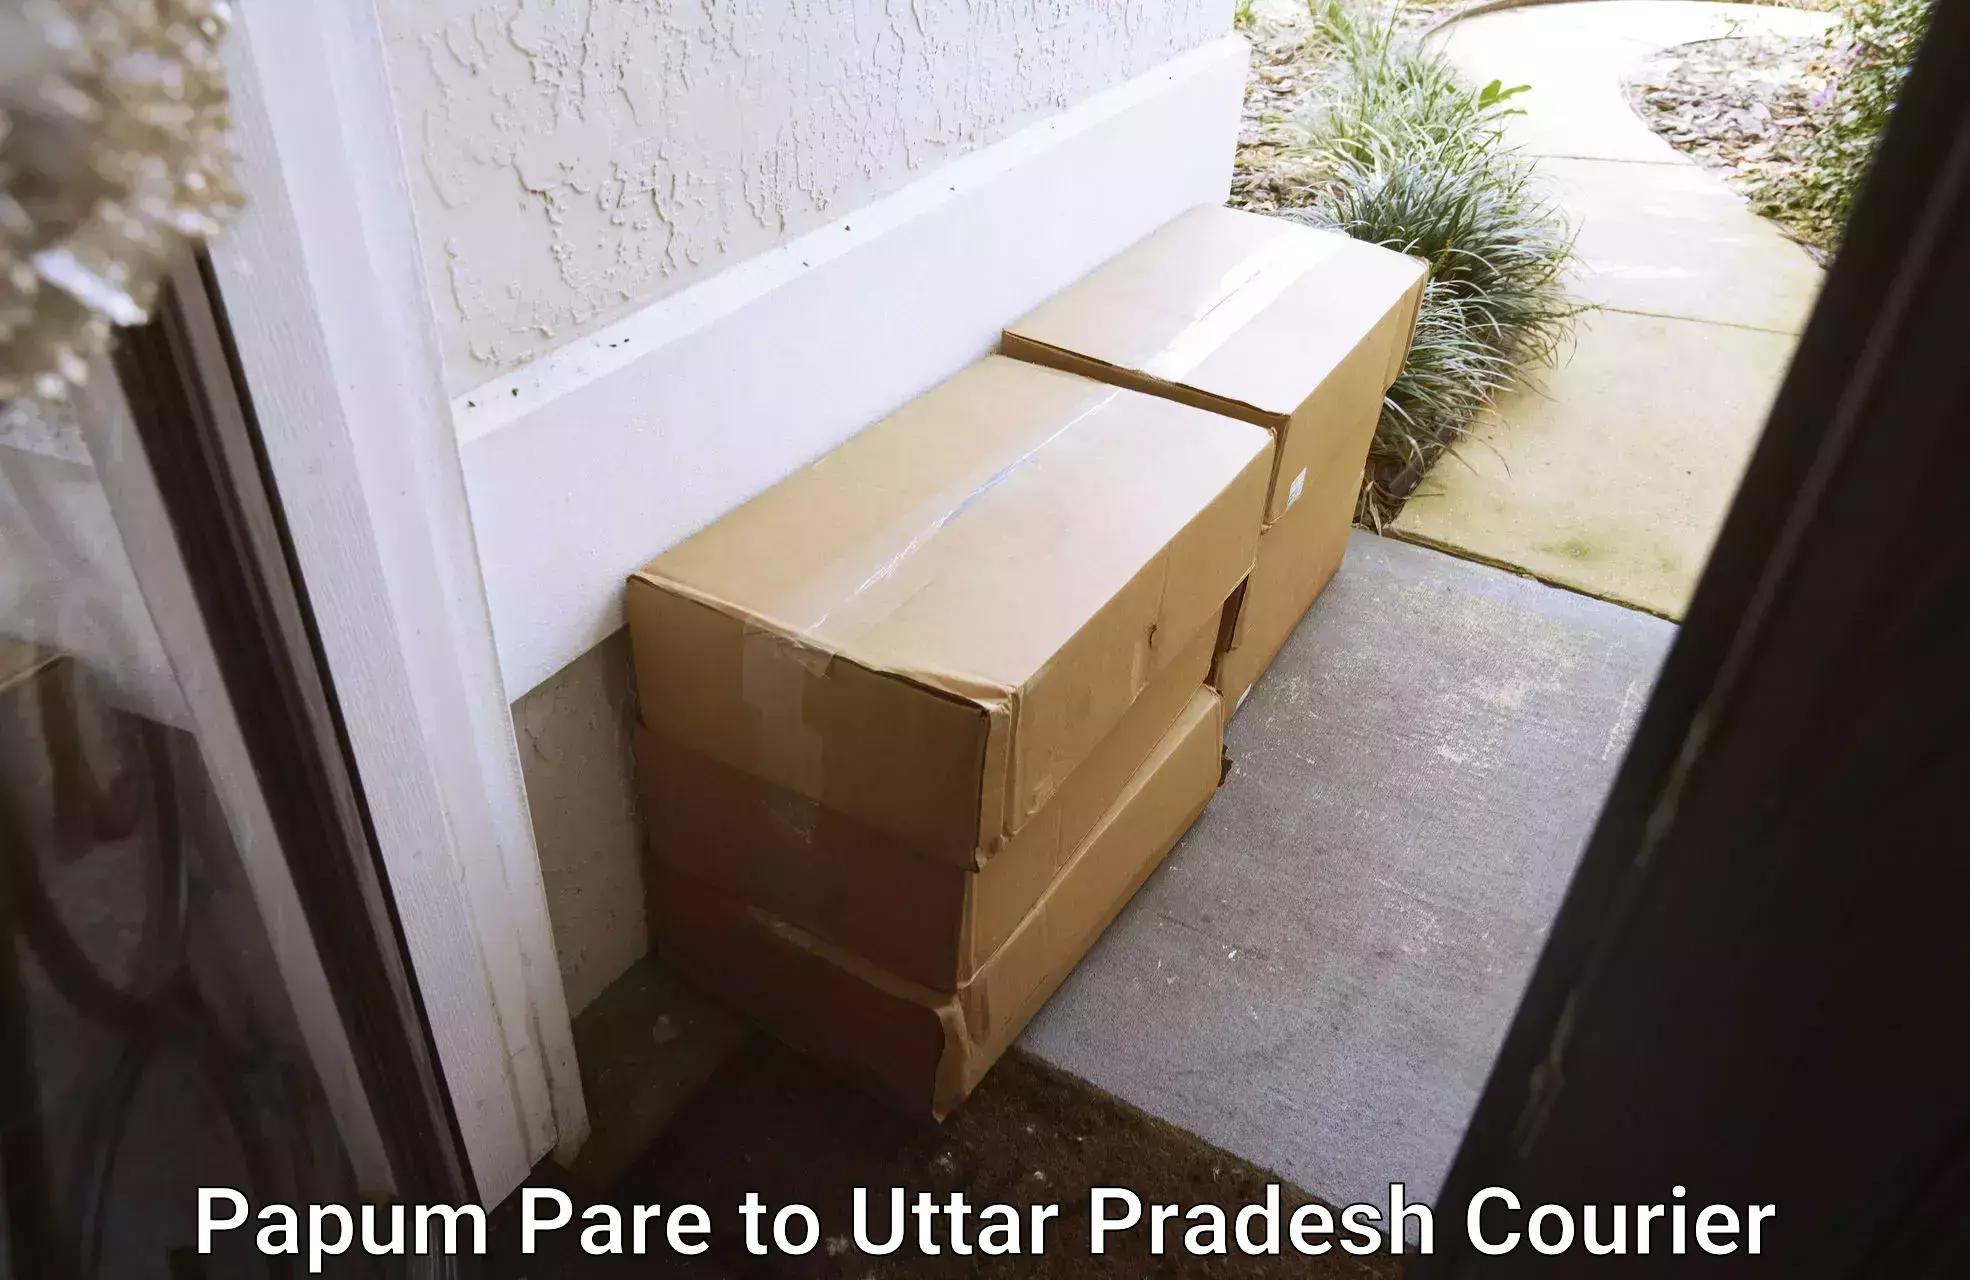 Next-day delivery options Papum Pare to Ambedkar Nagar